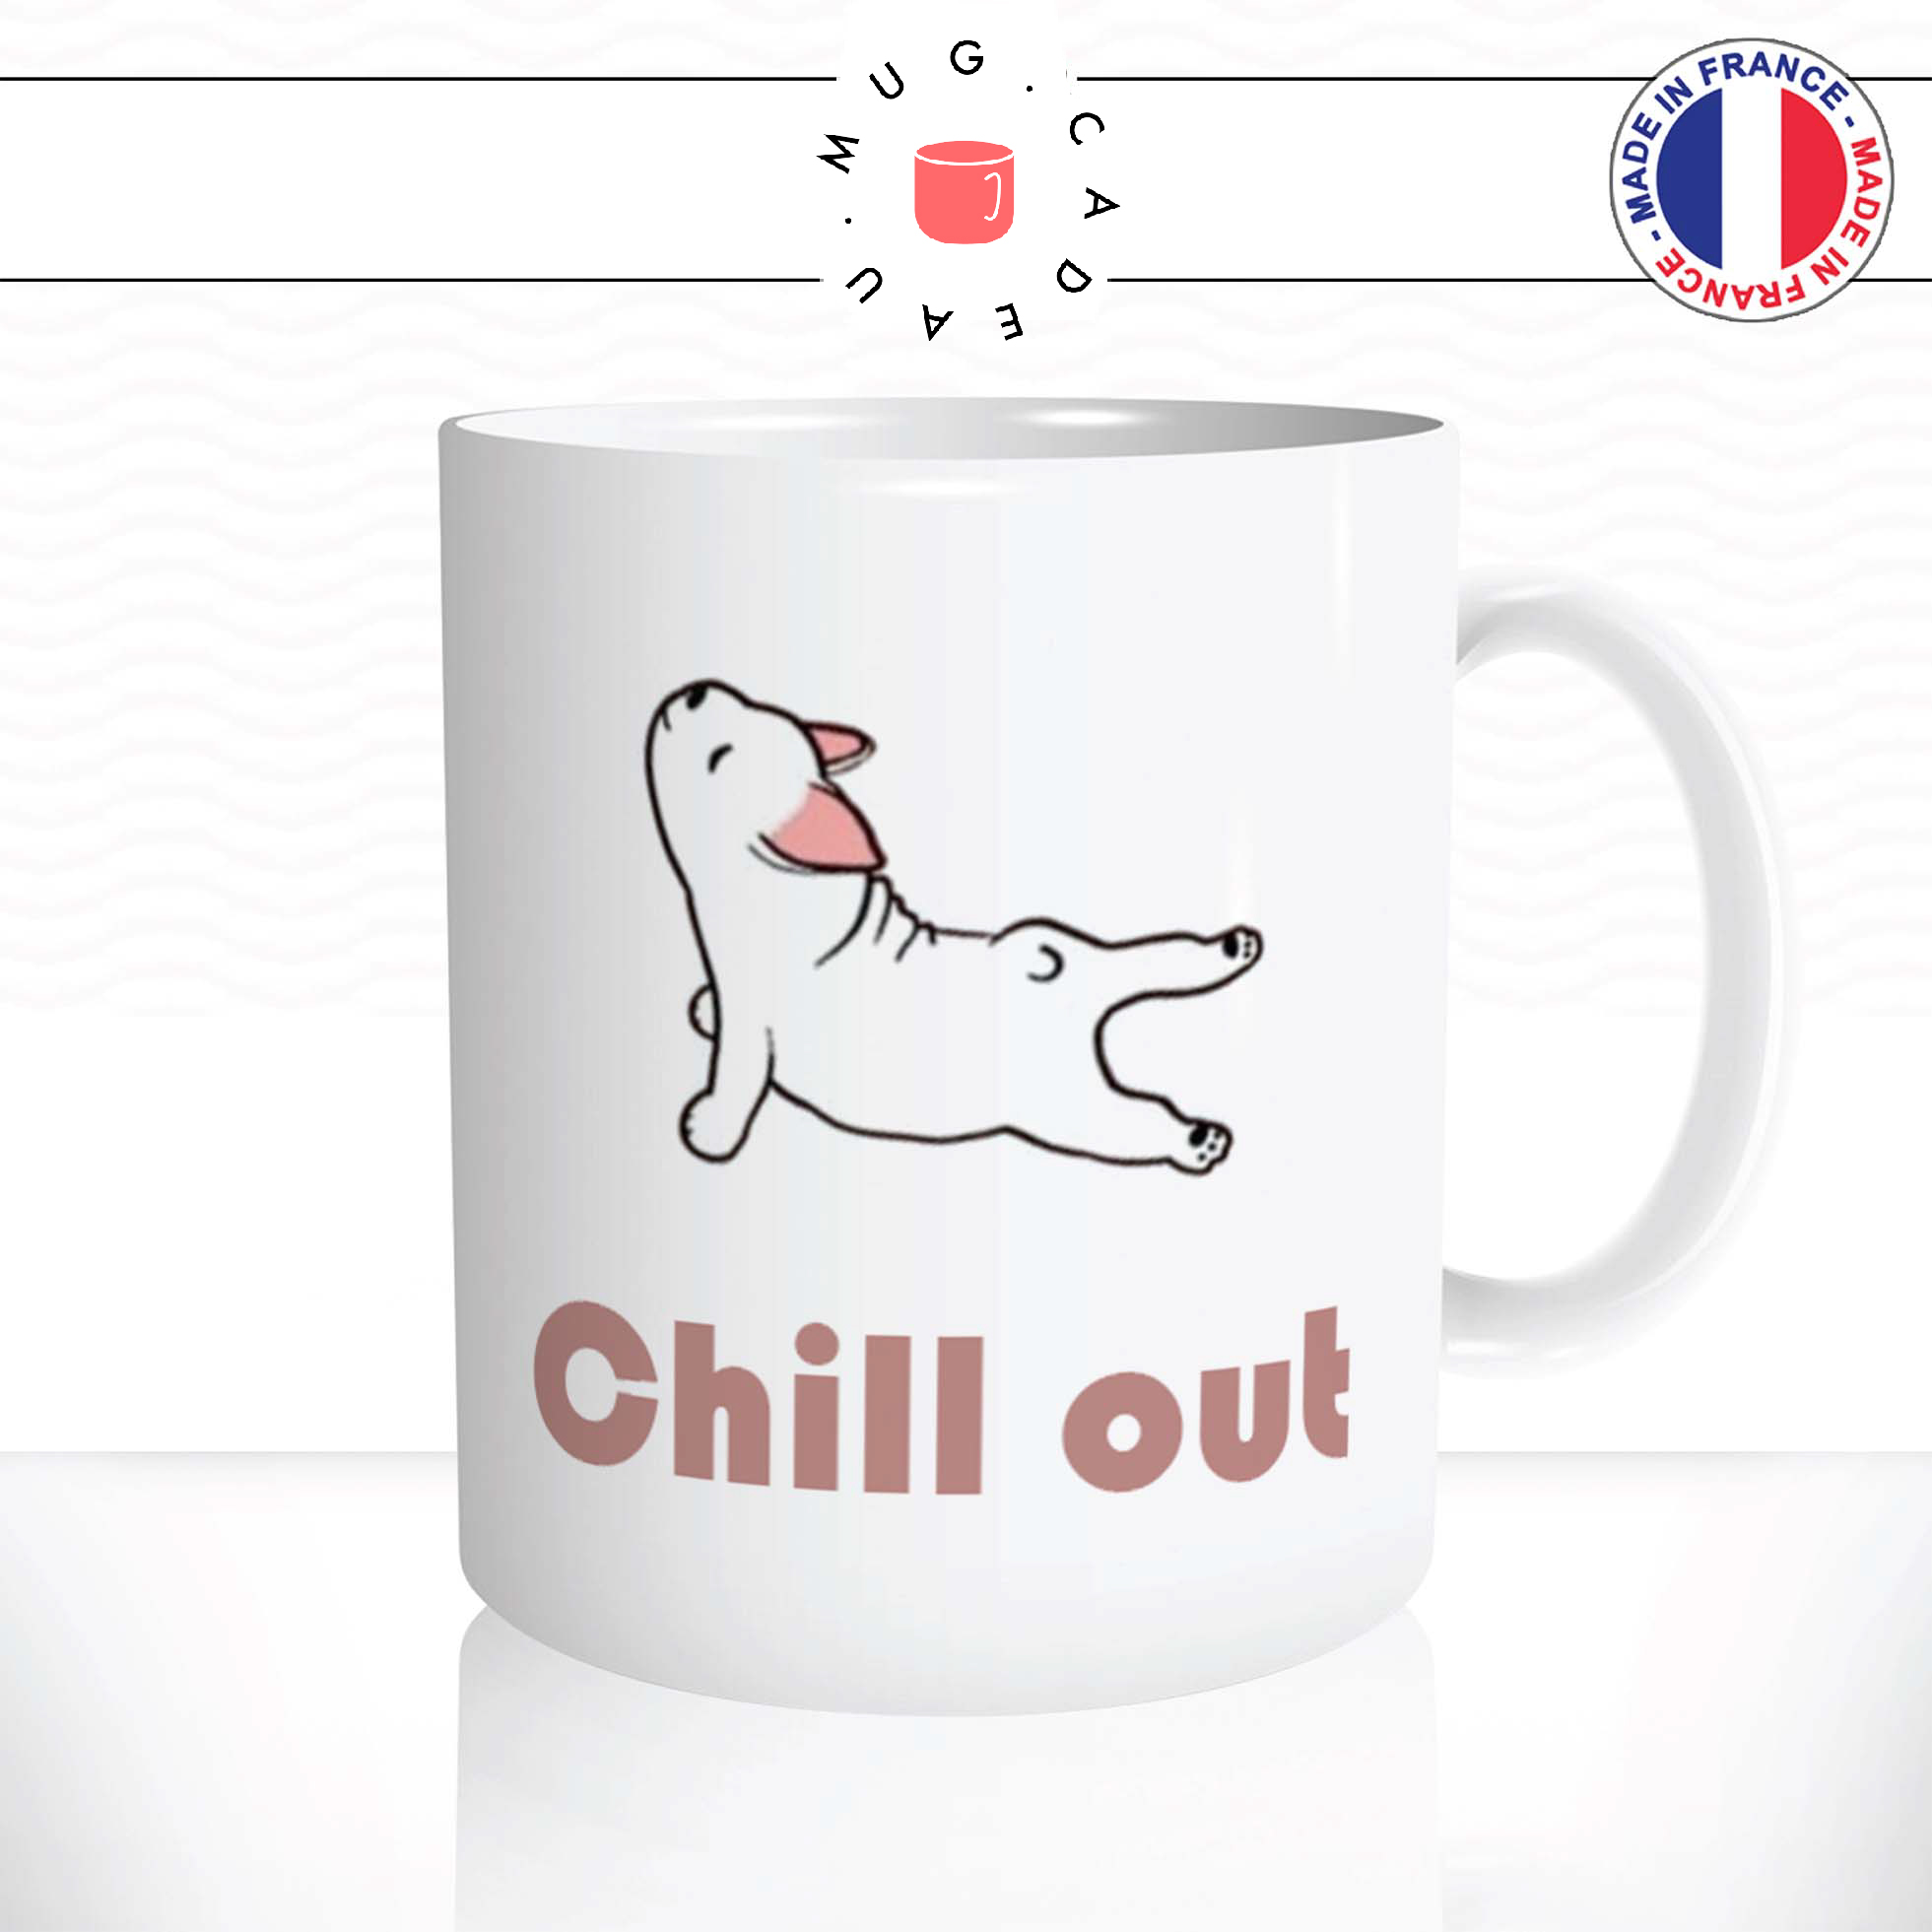 mug-tasse-ref13-chien-pug-chill-out-cafe-the-mugs-tasses-personnalise-anse-droite